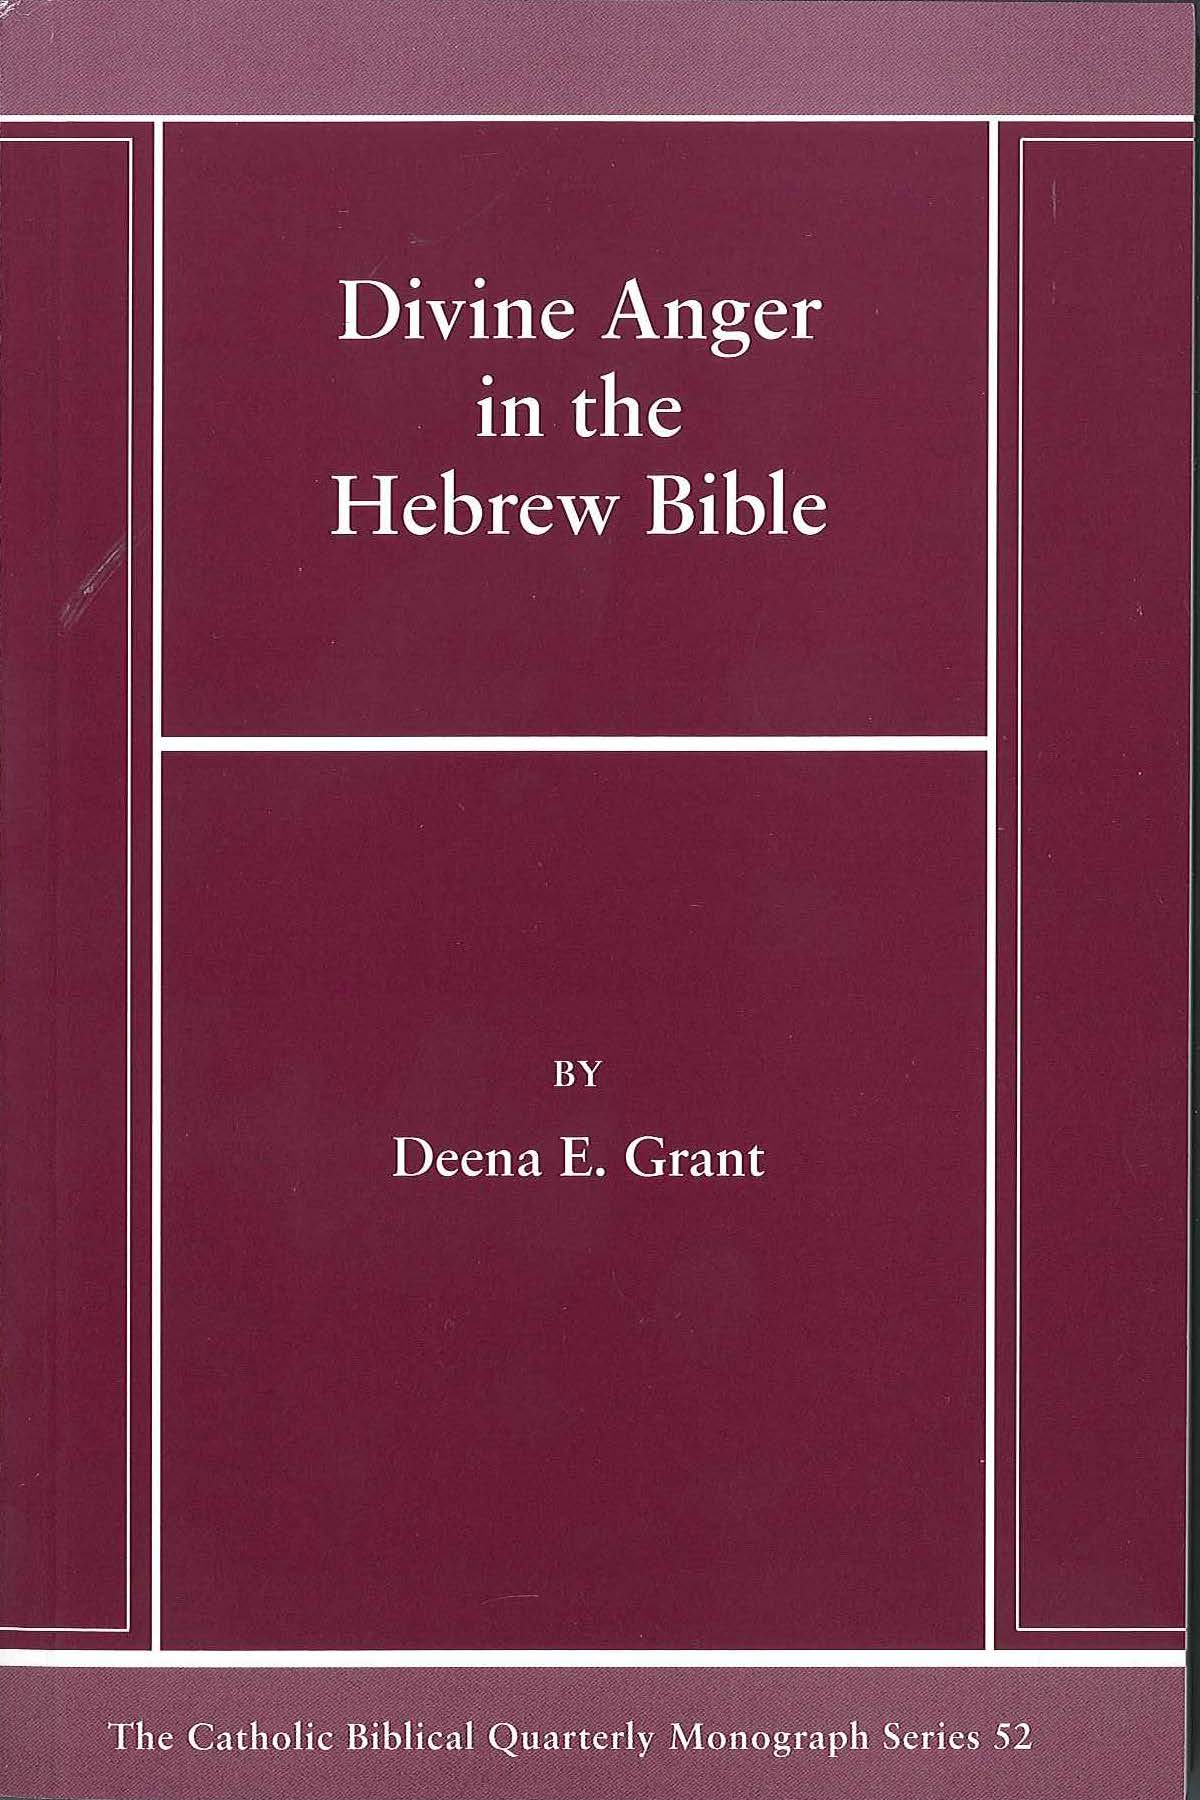 Divine Anger in the Hebrew Bible (Catholic Biblical Quarterly Monograph Series 52)